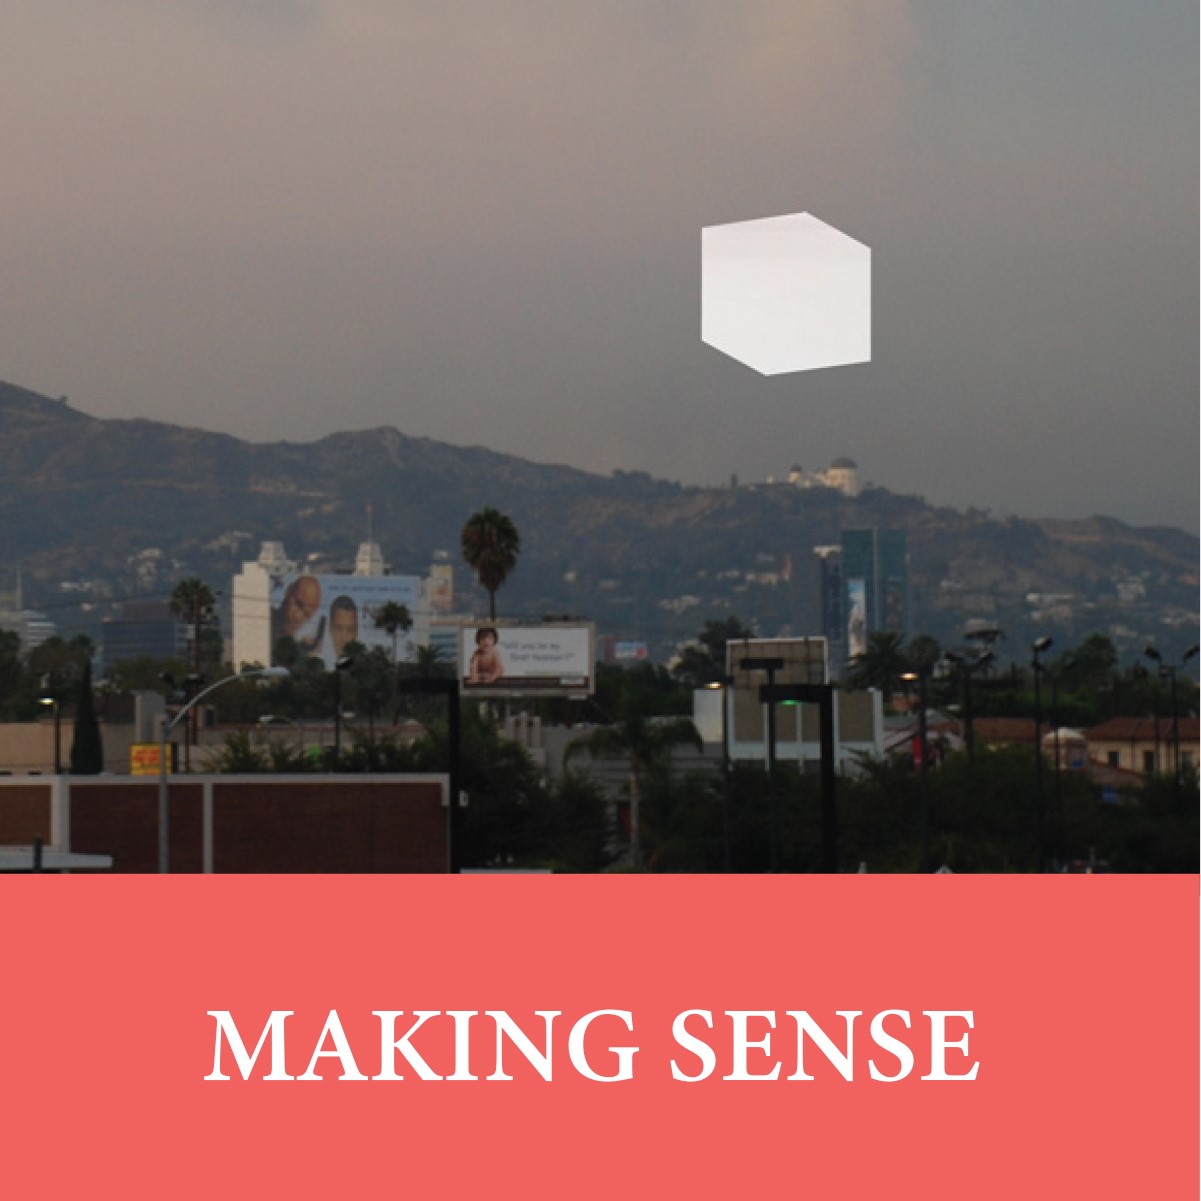 picture from Amy Balkin's Public Smog with red banner below with white text: Making Sense